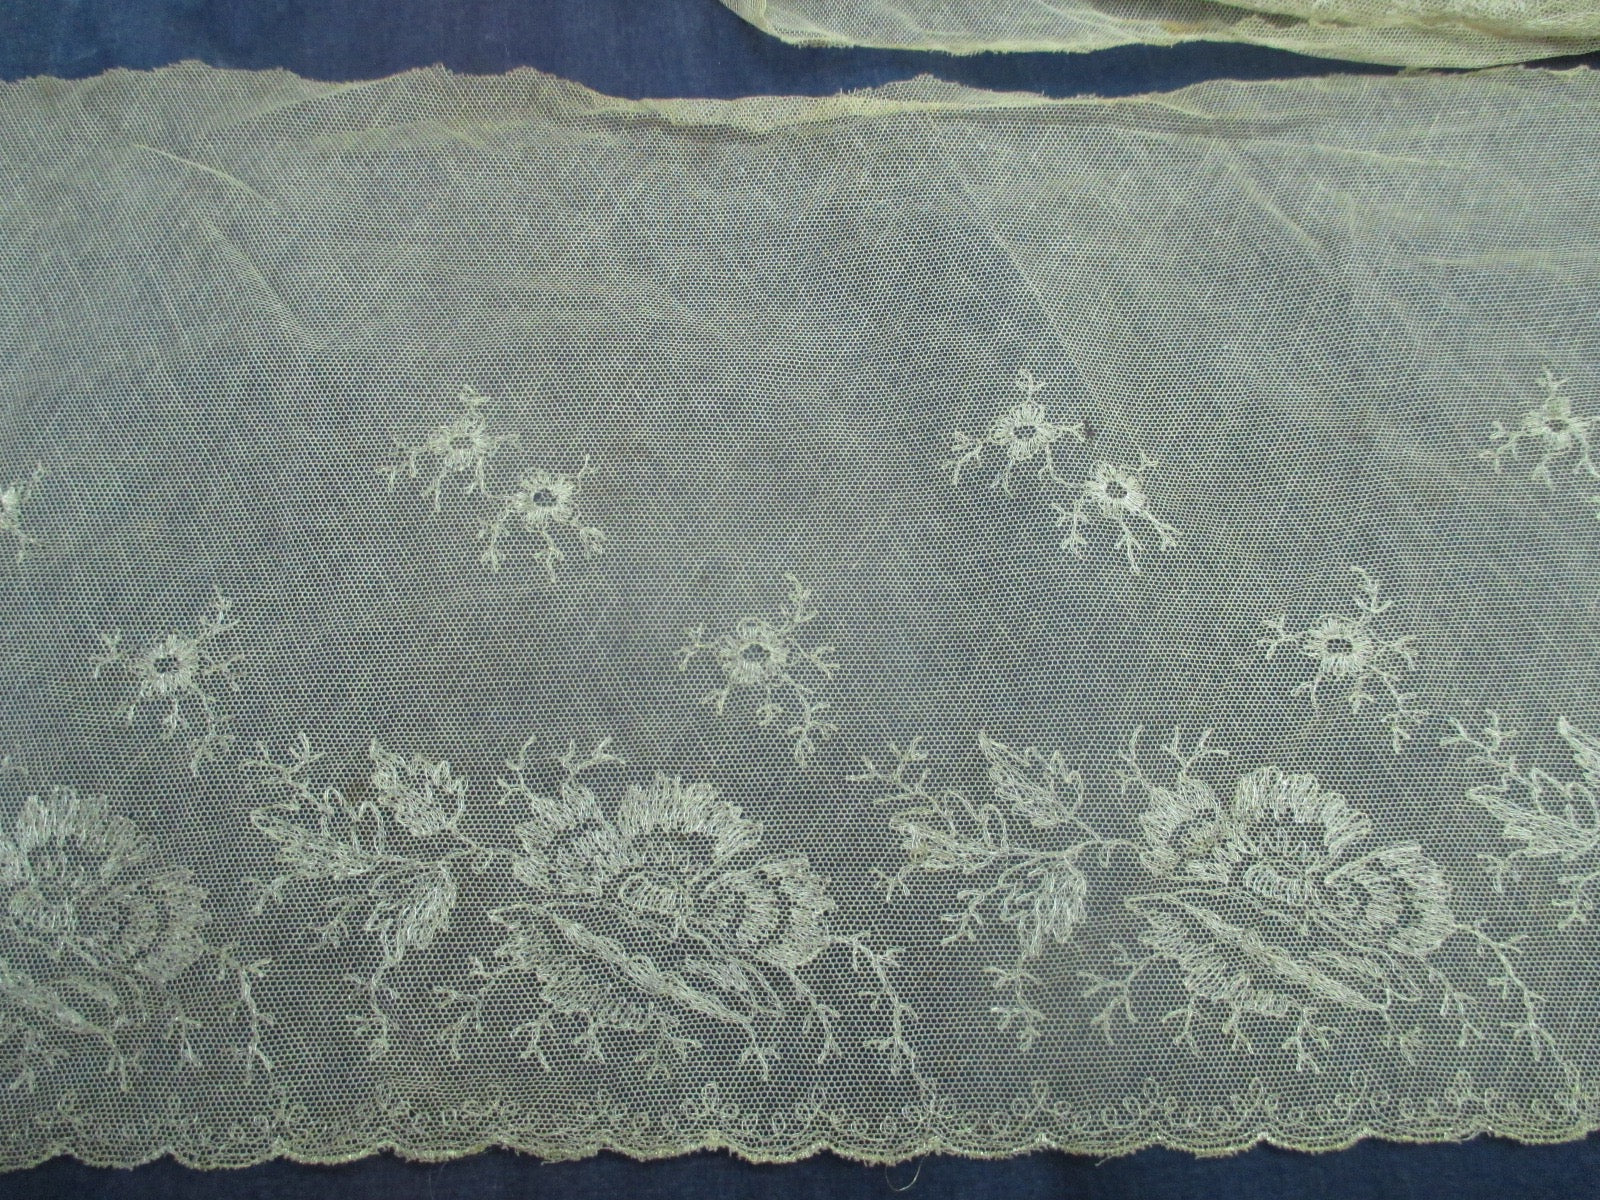 Antique Victorian Embroidered net flounce